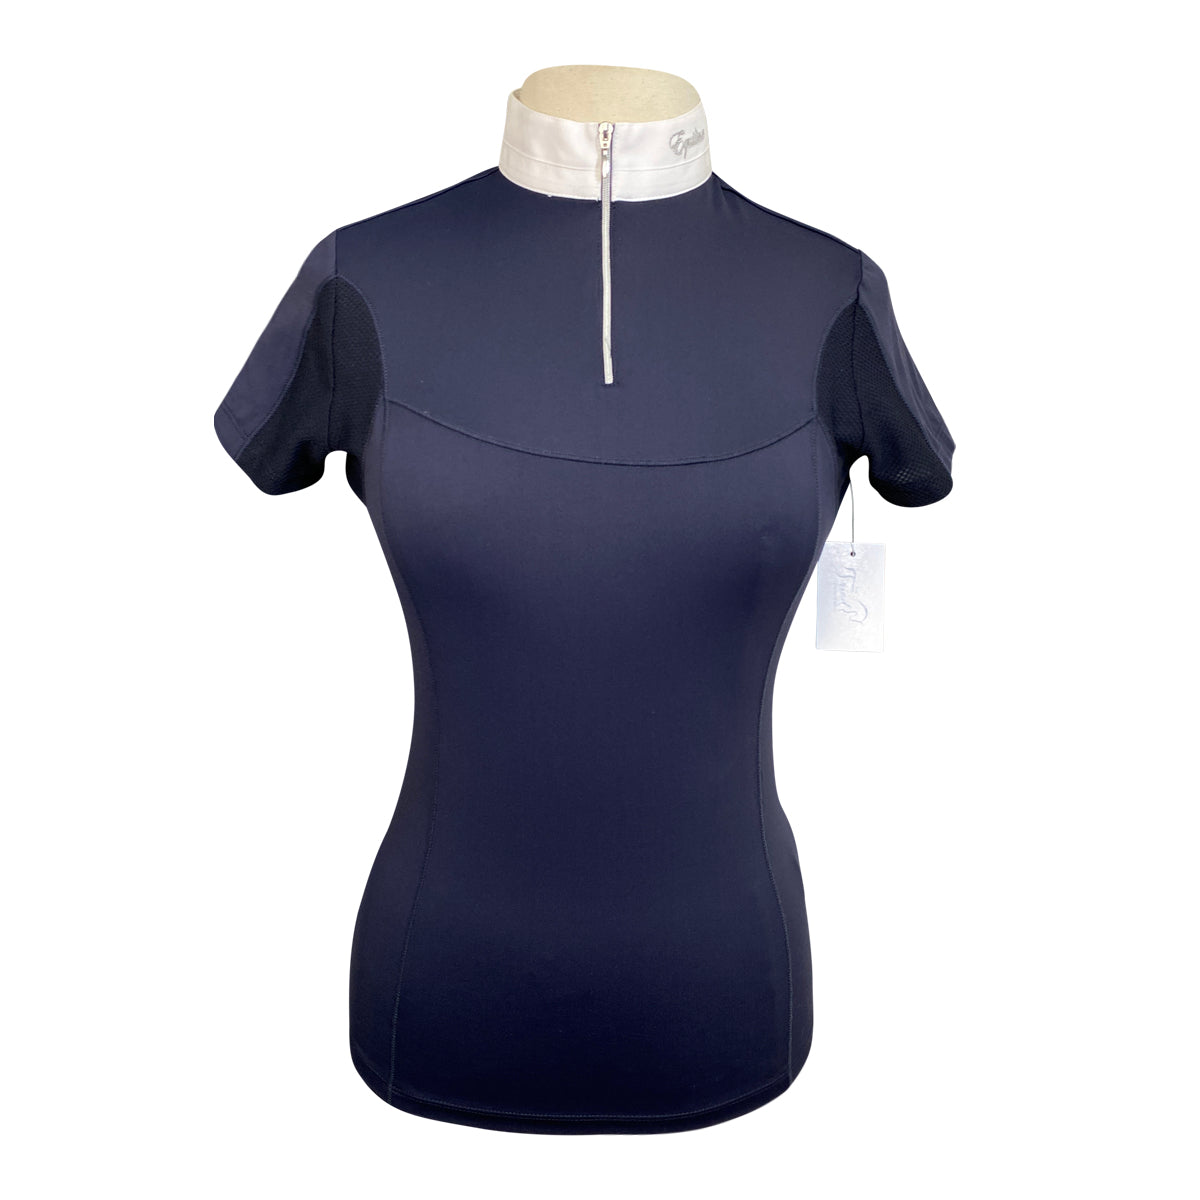 Equiline 'Contemporary' 1/4 Zip Performance Show Shirt in Navy/White